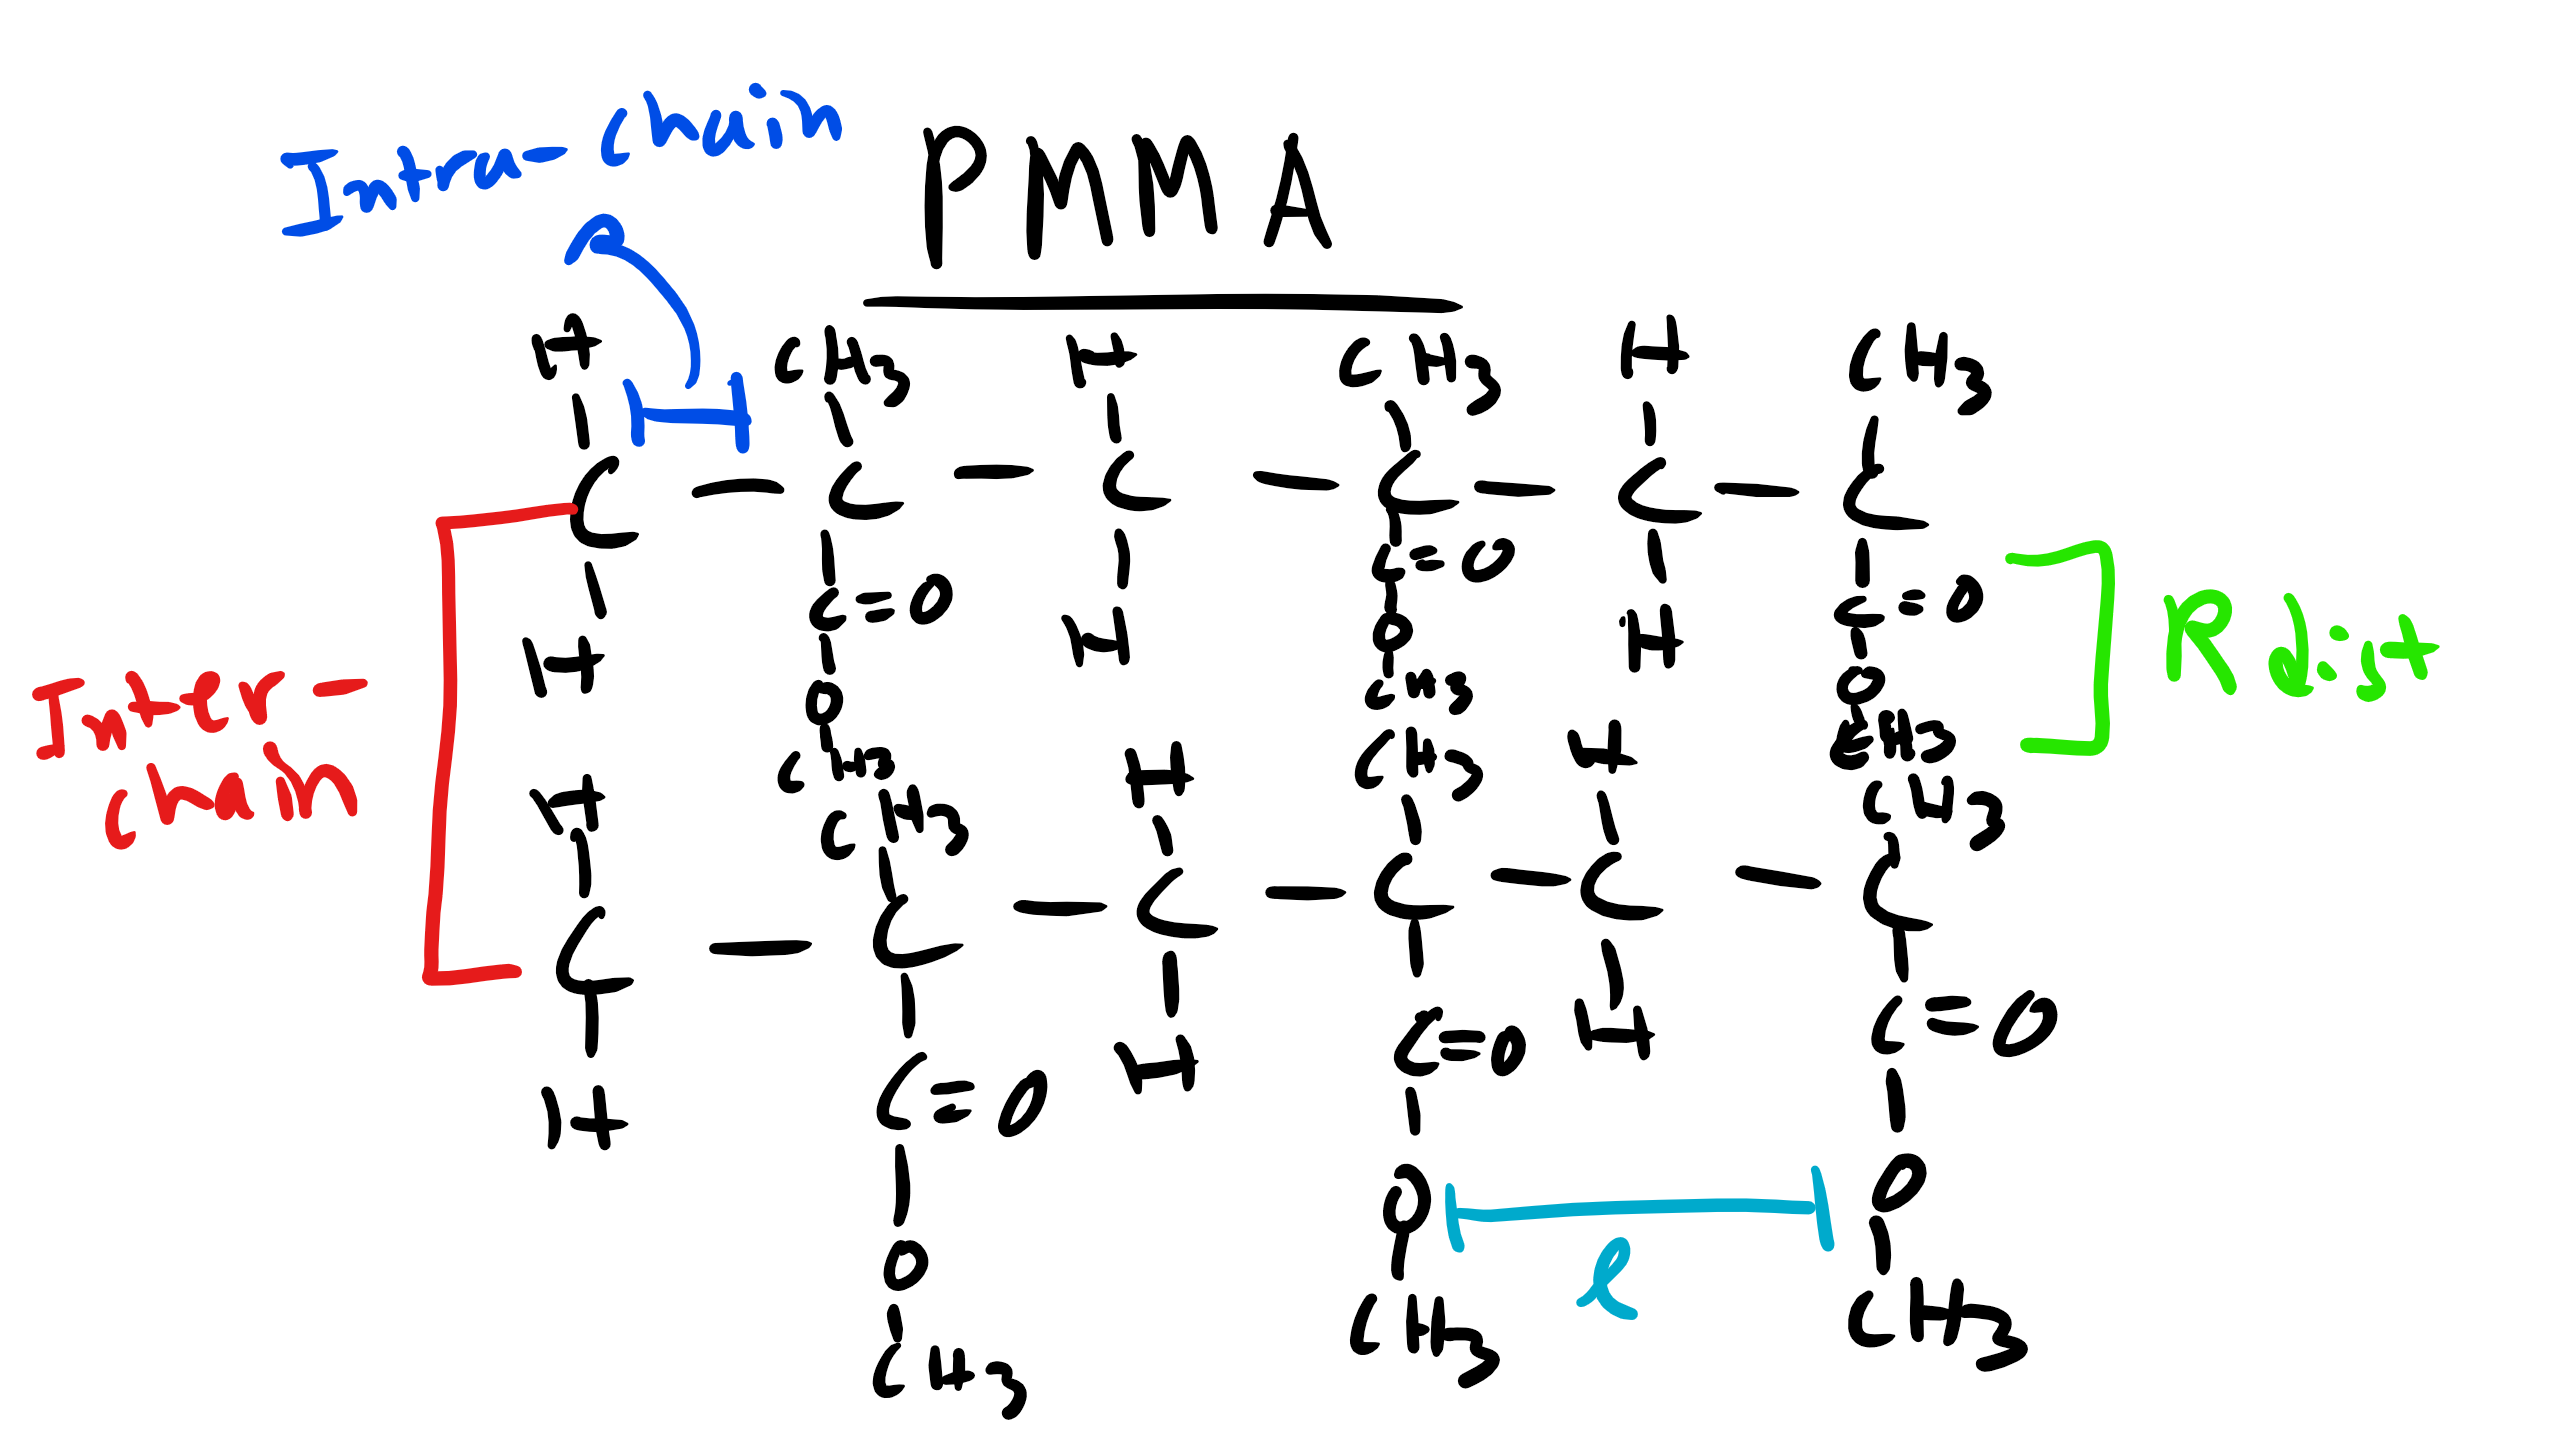 pmma.png